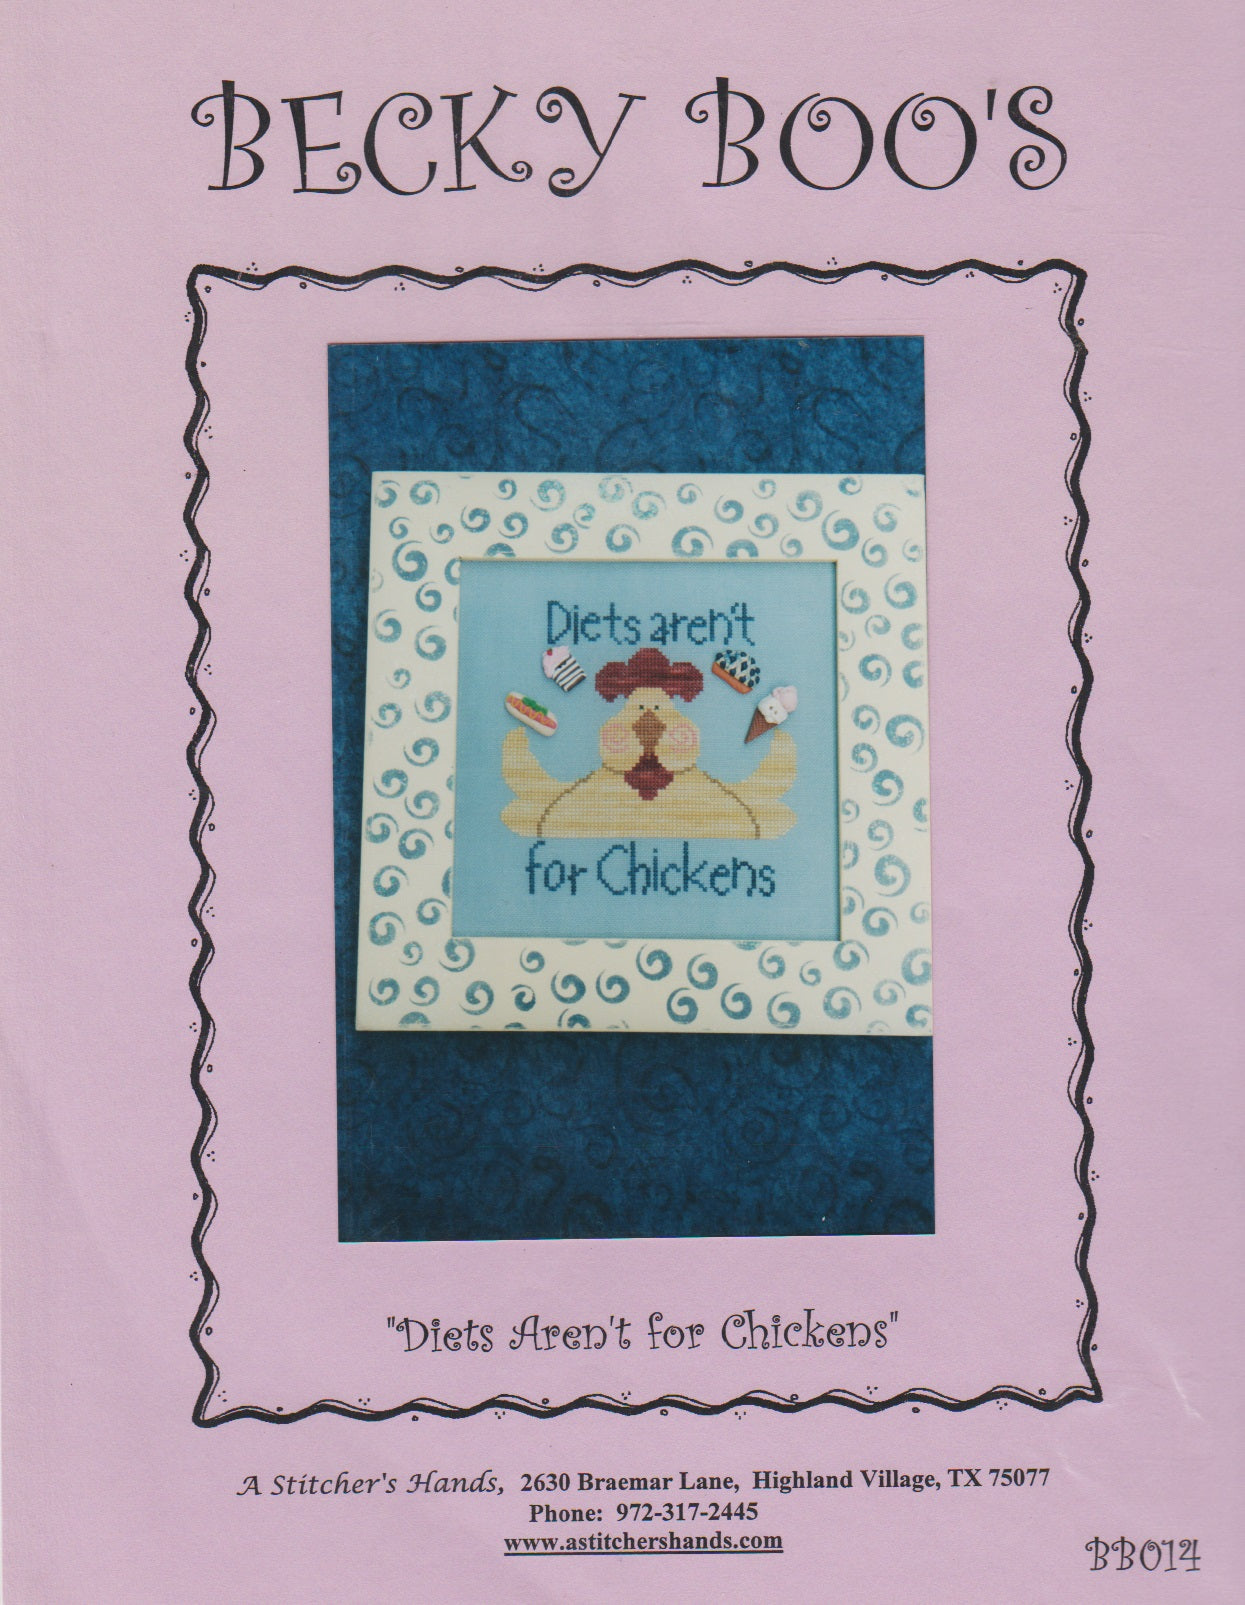 A Stitcher's Hands Becky Boo's Diets Aren't For Chickens BB014 cross stitch pattern